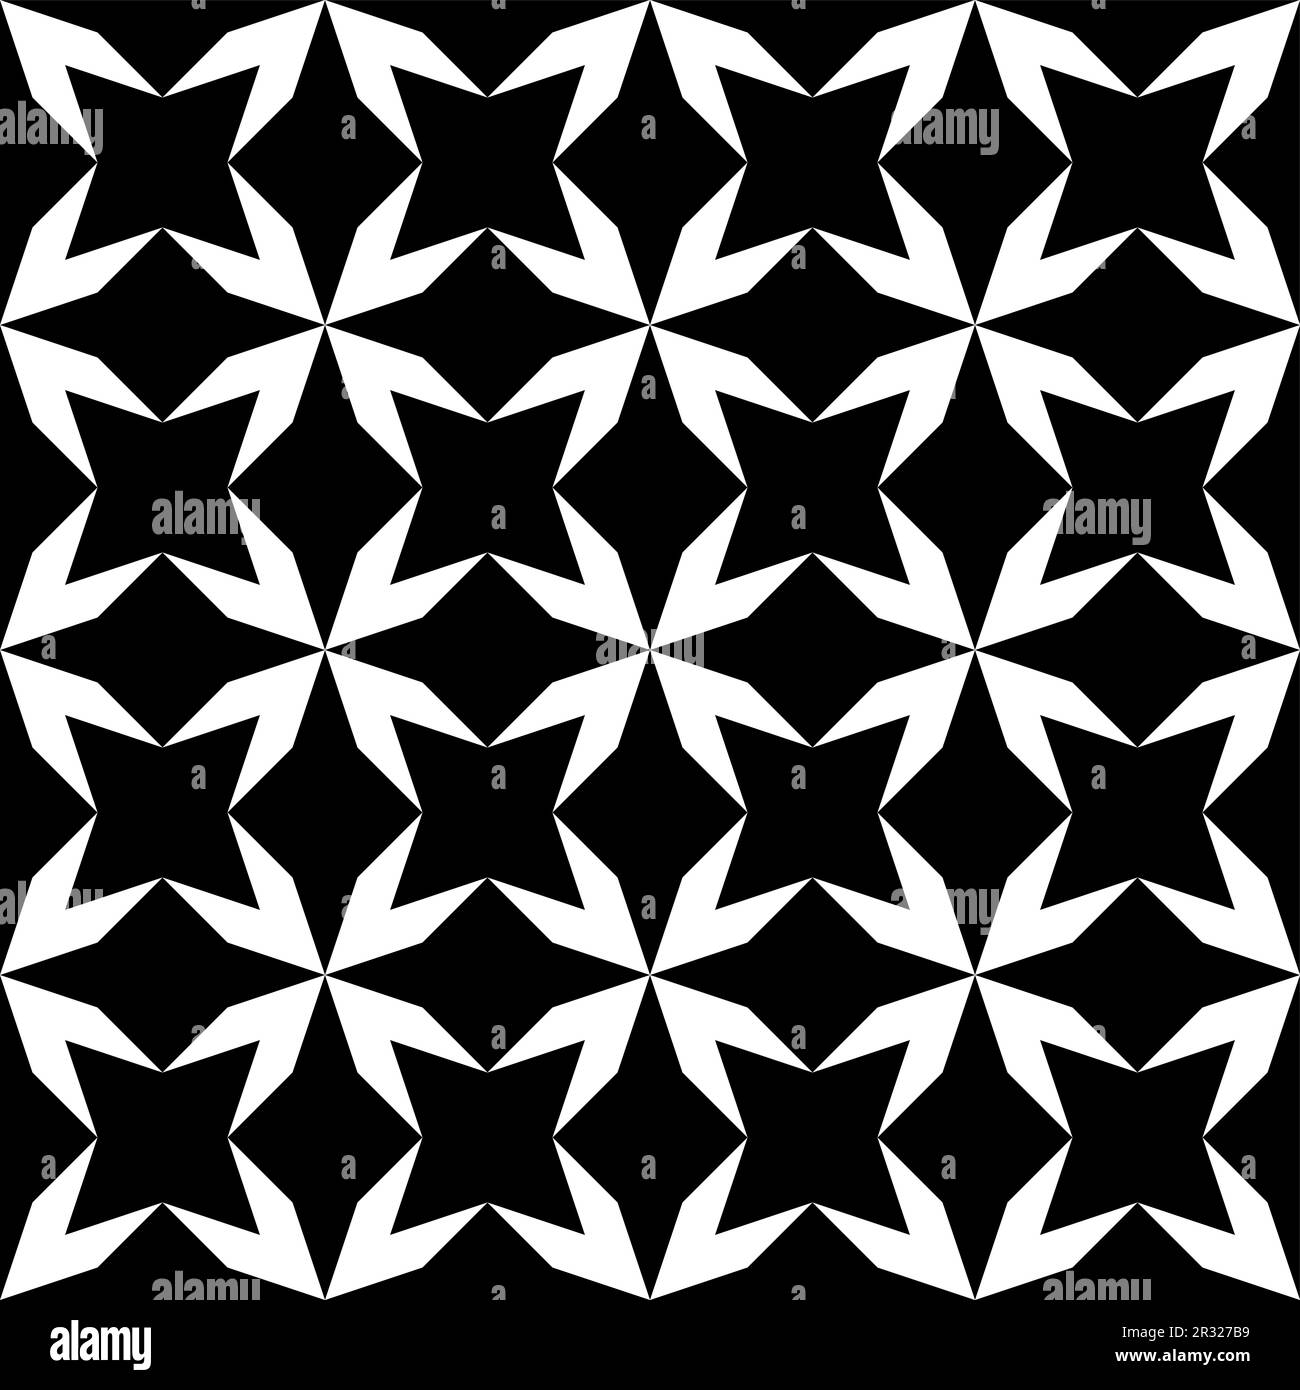 Star shape pattern, seamless tile that can be assembled endlessly in all directions, composed of right triangles. Usable as motif for backgrounds etc. Stock Photo